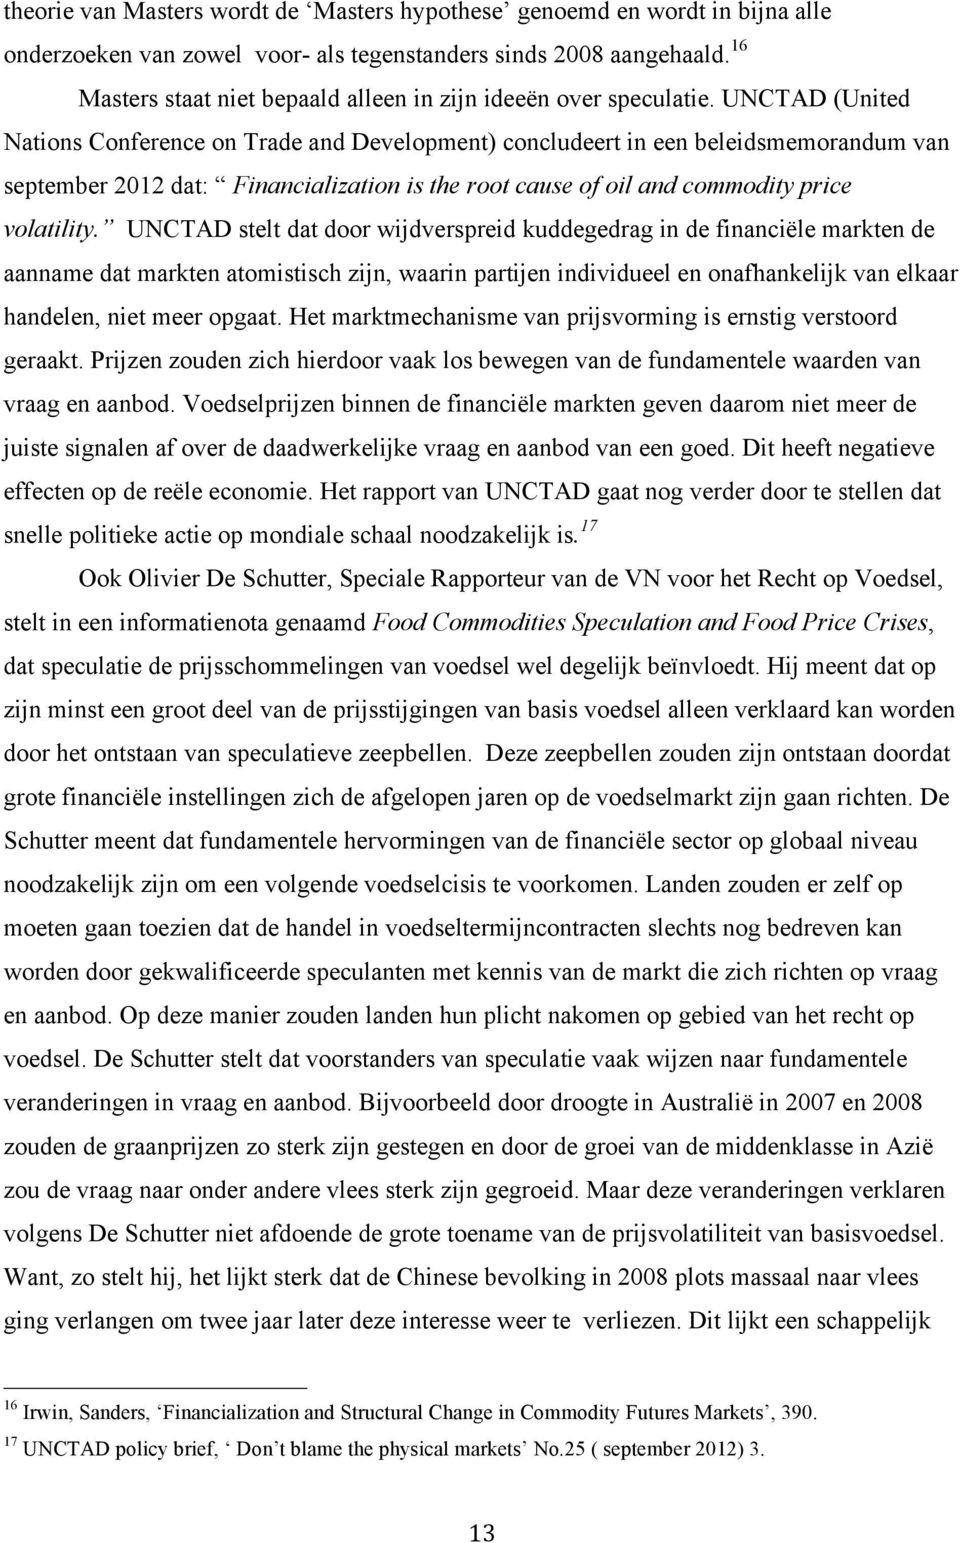 UNCTAD (United Nations Conference on Trade and Development) concludeert in een beleidsmemorandum van september 2012 dat: Financialization is the root cause of oil and commodity price volatility.